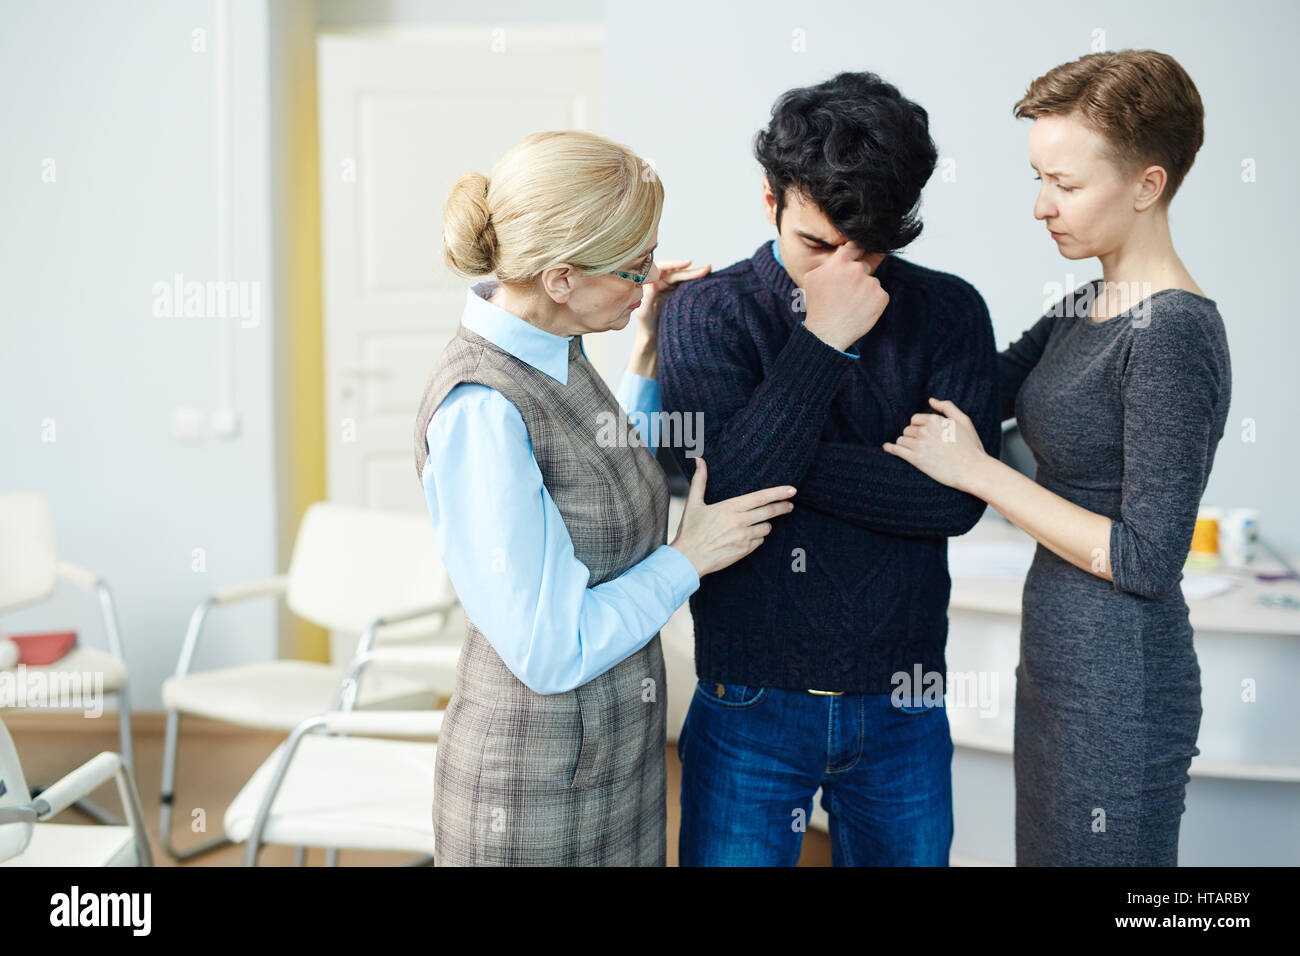 Portrait of mentor and wife comforting young crying man after psychological therapy session Stock Photo